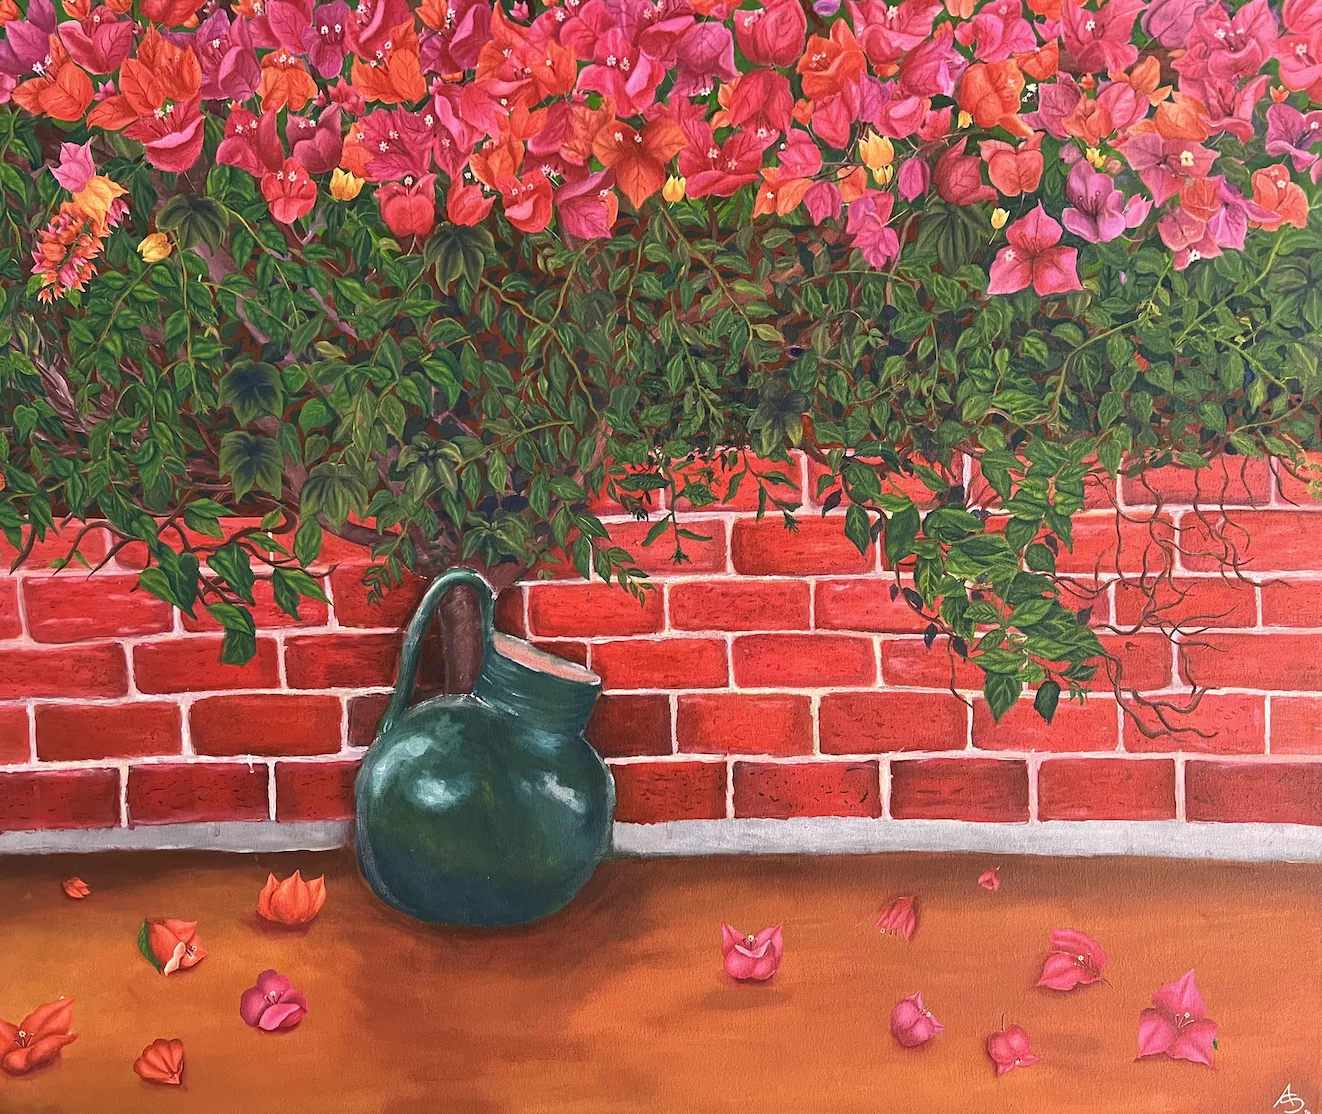 Angel Sebastian Lopez C Las Bugambilia de Primavera (Springtime Bugambilias), 2022  Oils on canvas. 50”x60”  The artist's inaugural piece is a dark green rounded ceramic pitcher which sits on the dirt ground where there are scattered blooms in front of a bugambilia trunk. Above a low red brick wall the trunk leads to a layer of lush foliage topped with dark pink blooms.